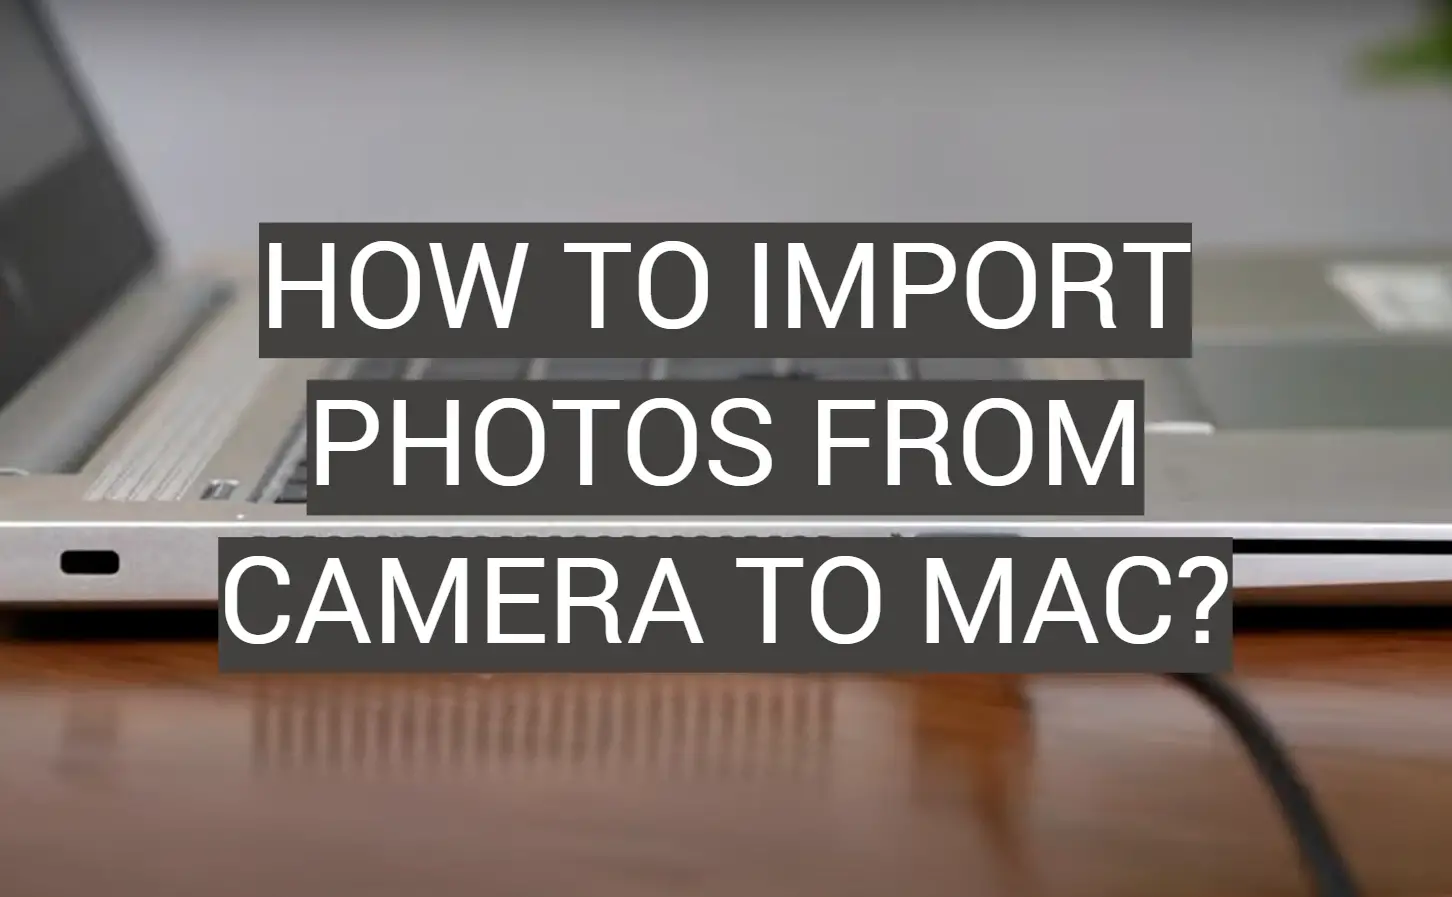 How to Import Photos From Camera to Mac?